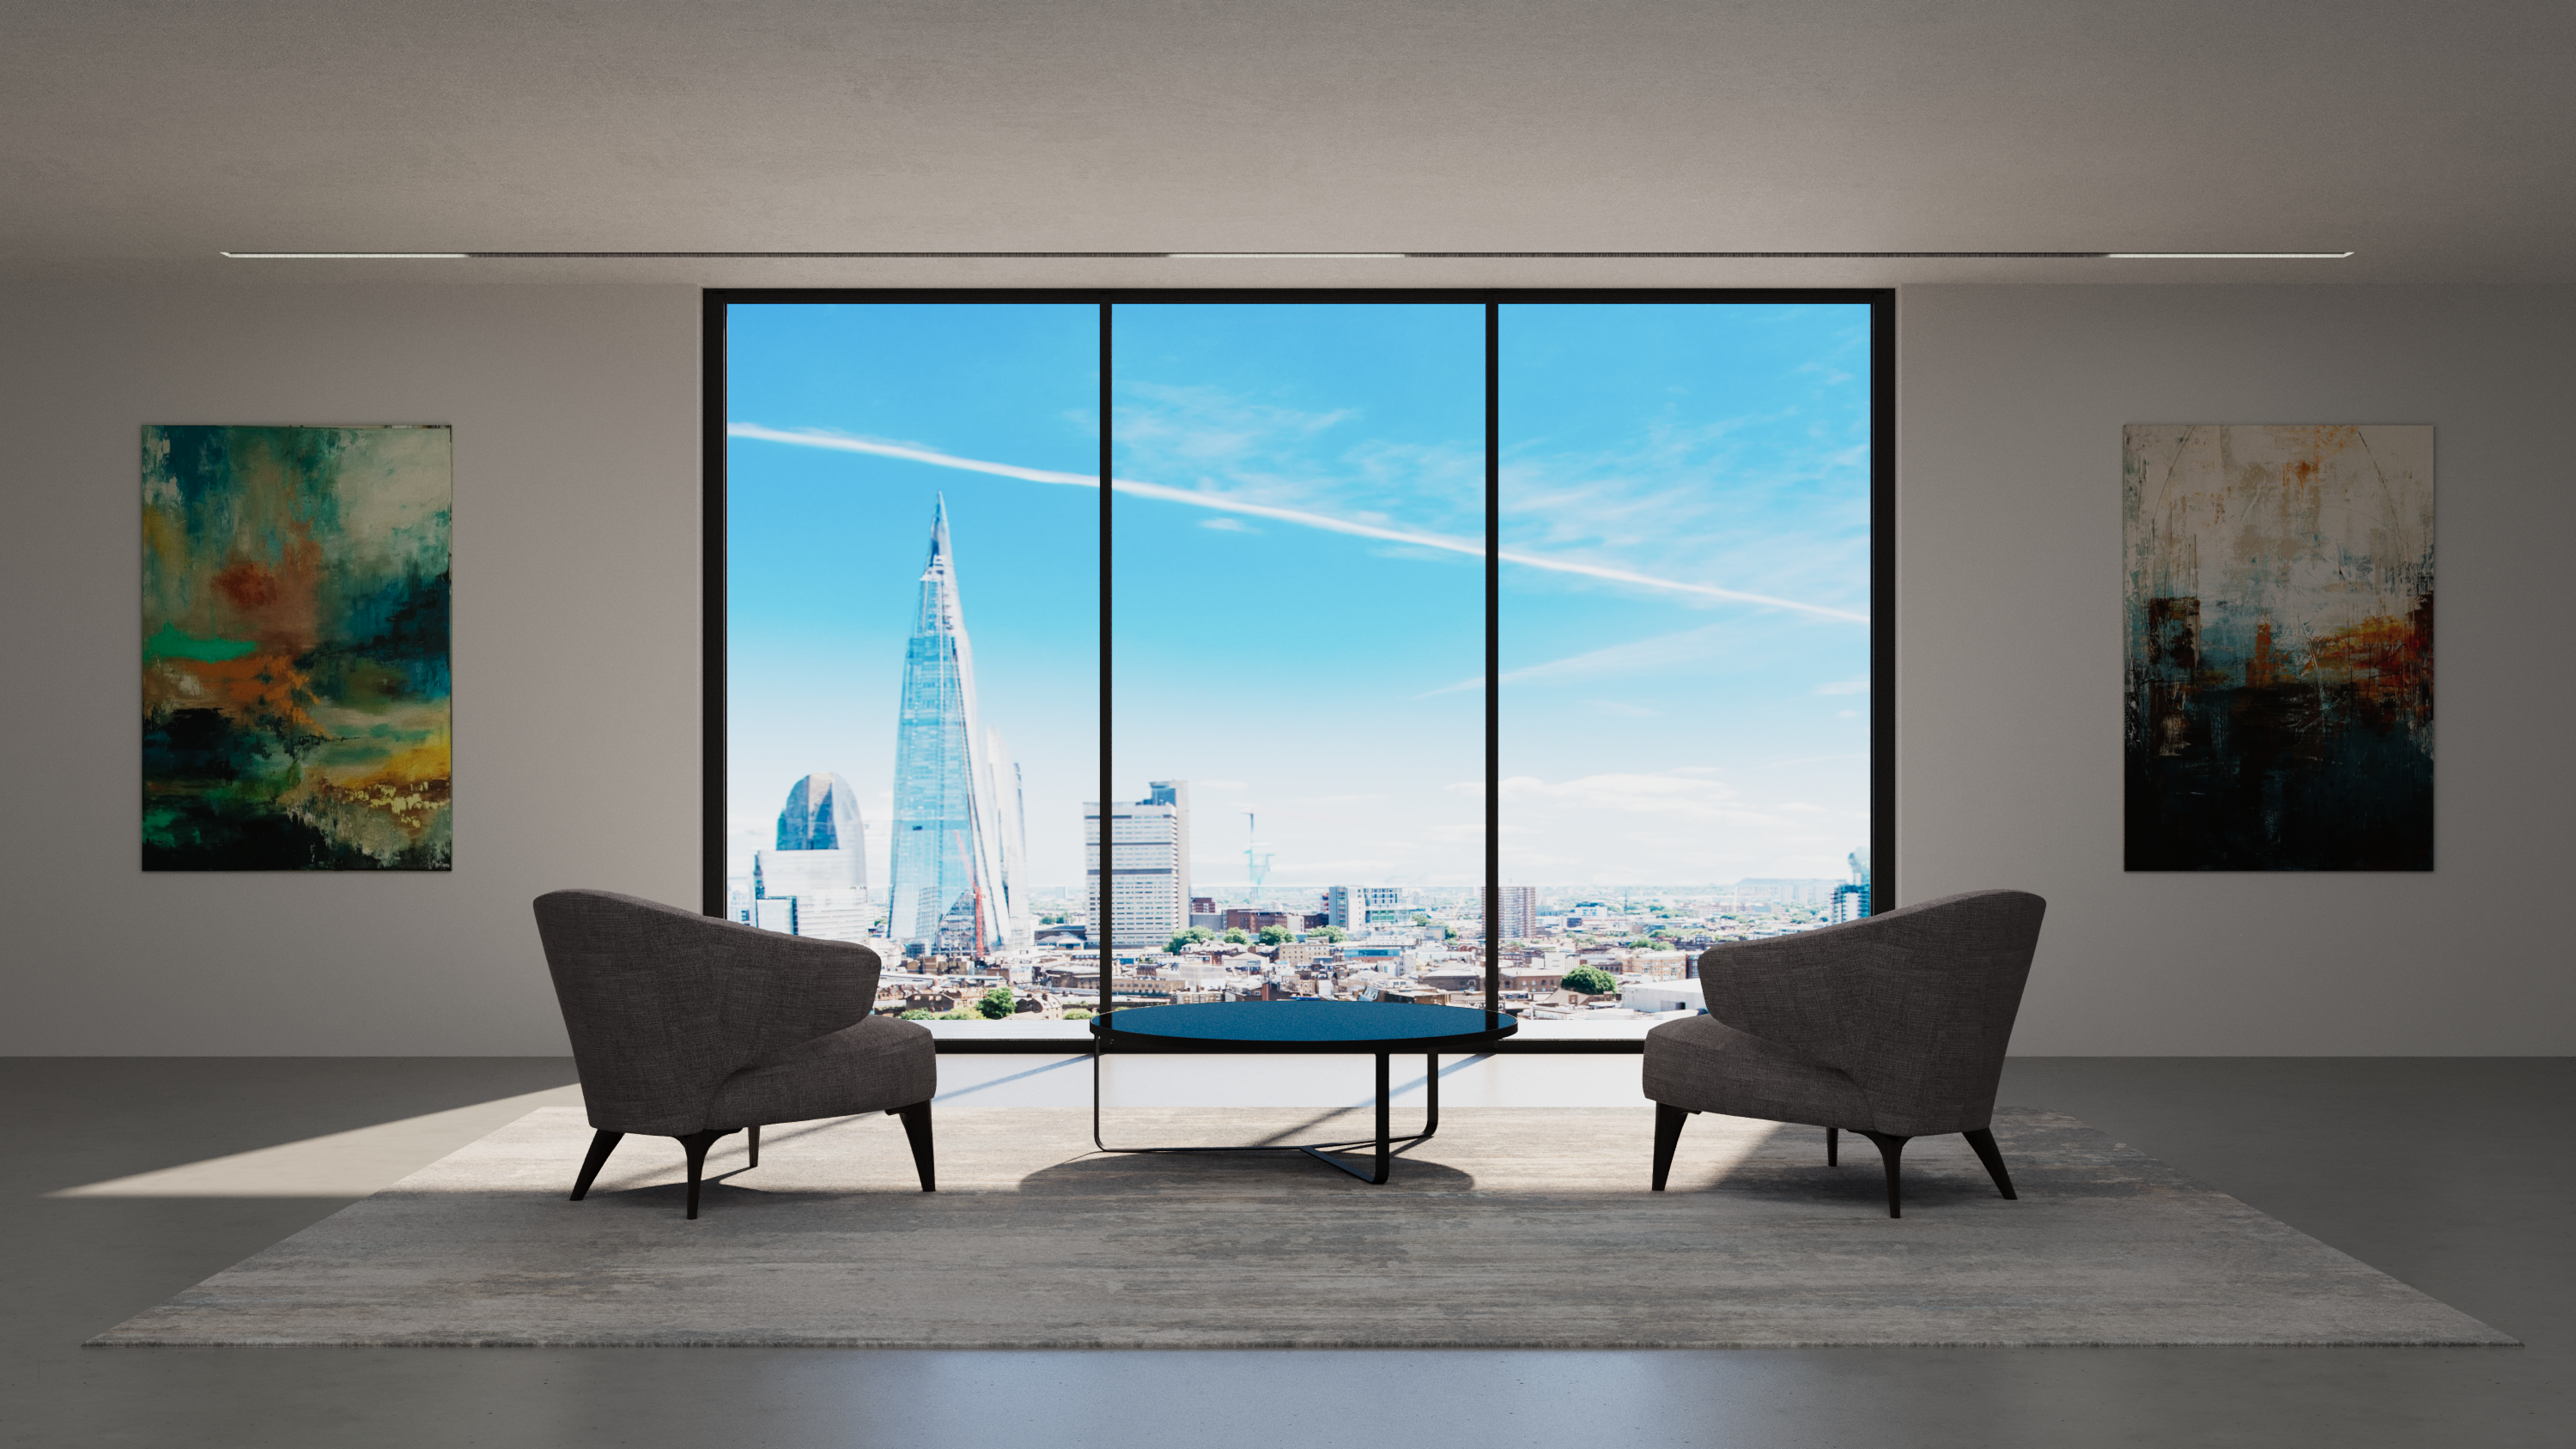 Slide and Turn Doors: A Revolutionary Glazing Innovation from Glideline